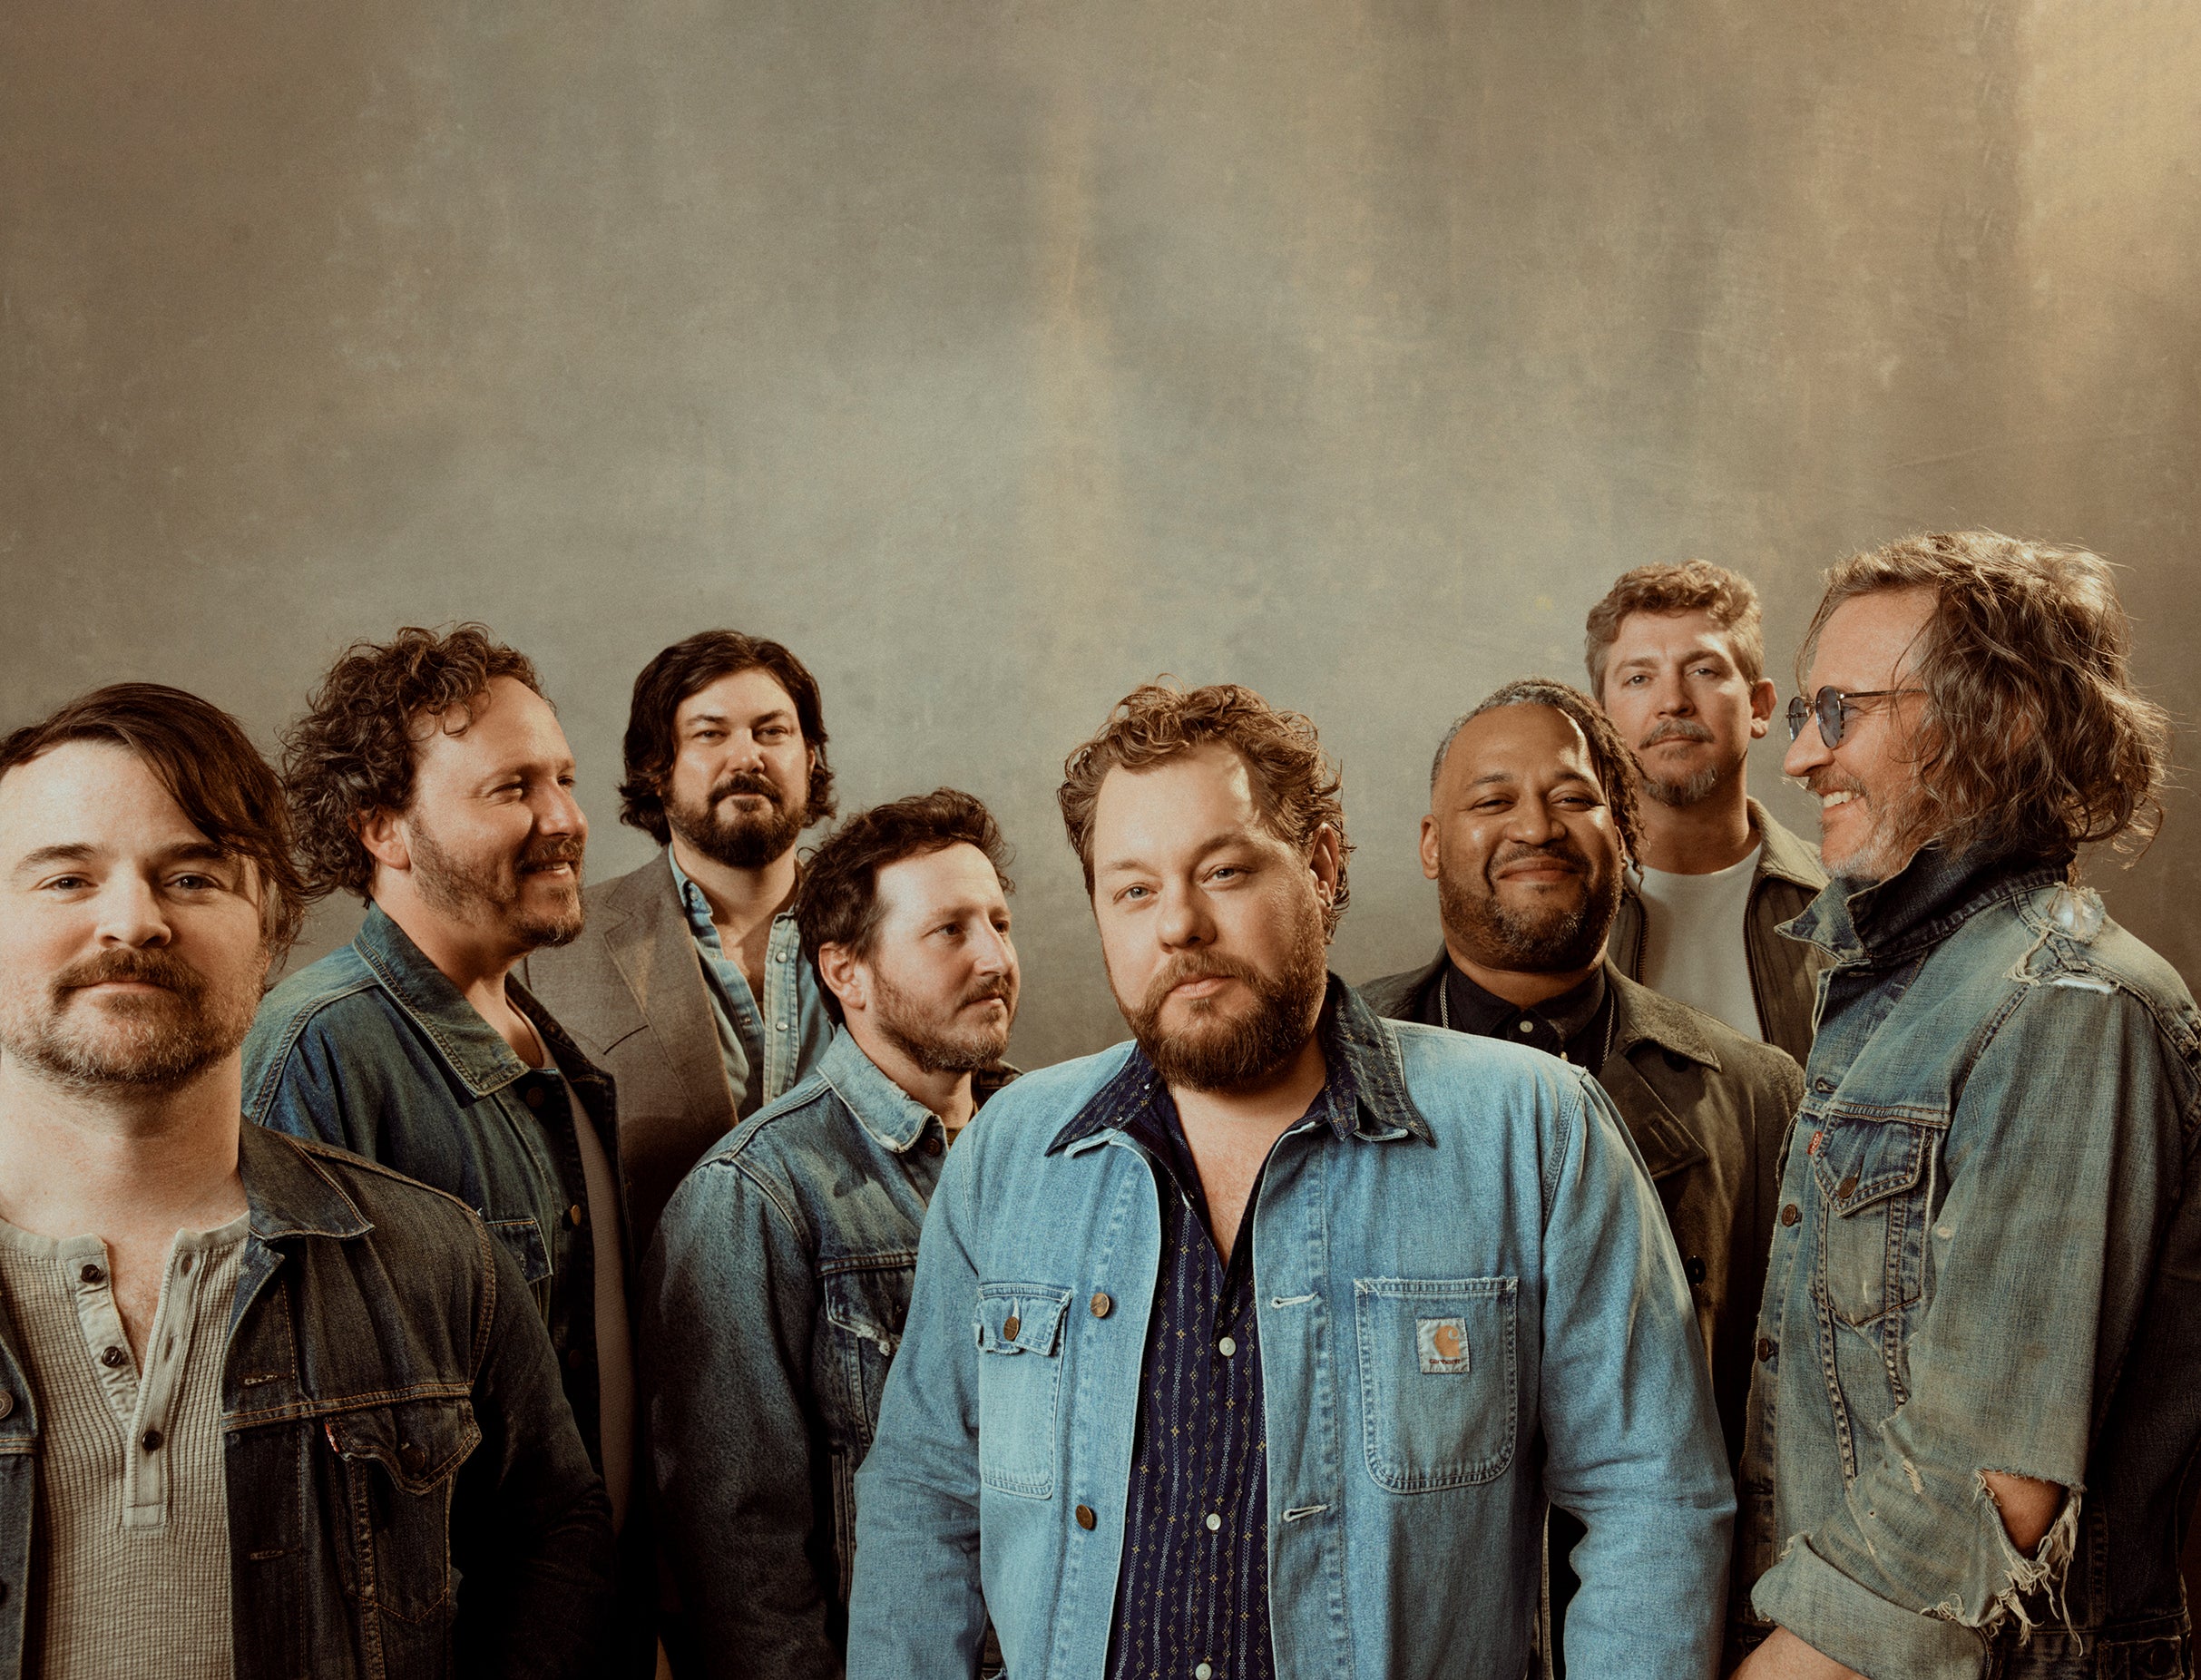 presale code for Nathaniel Rateliff & The Night Sweats: South of Here Tour advanced tickets in Saint Paul at Xcel Energy Center